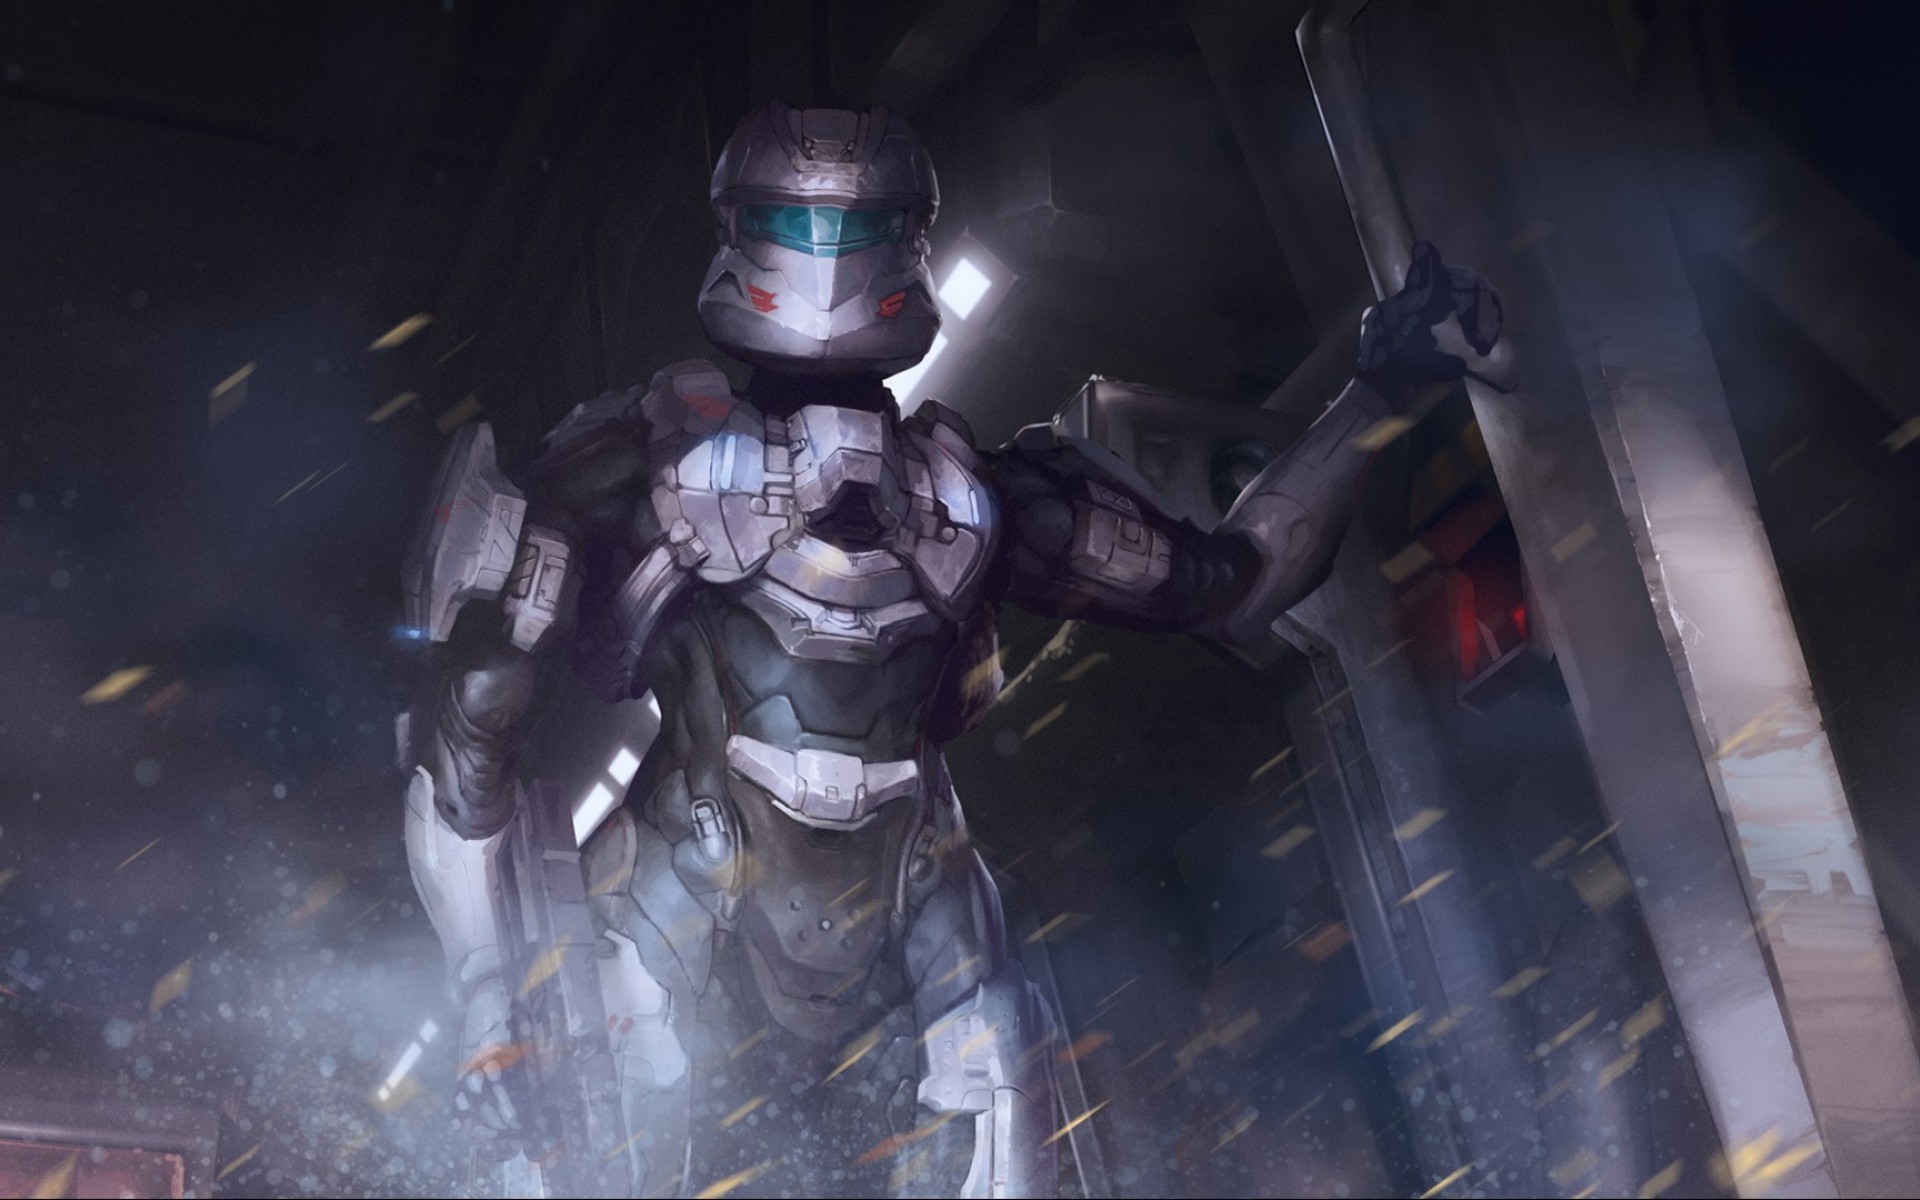 download the new version for windows Halo: Spartan Assault Lite